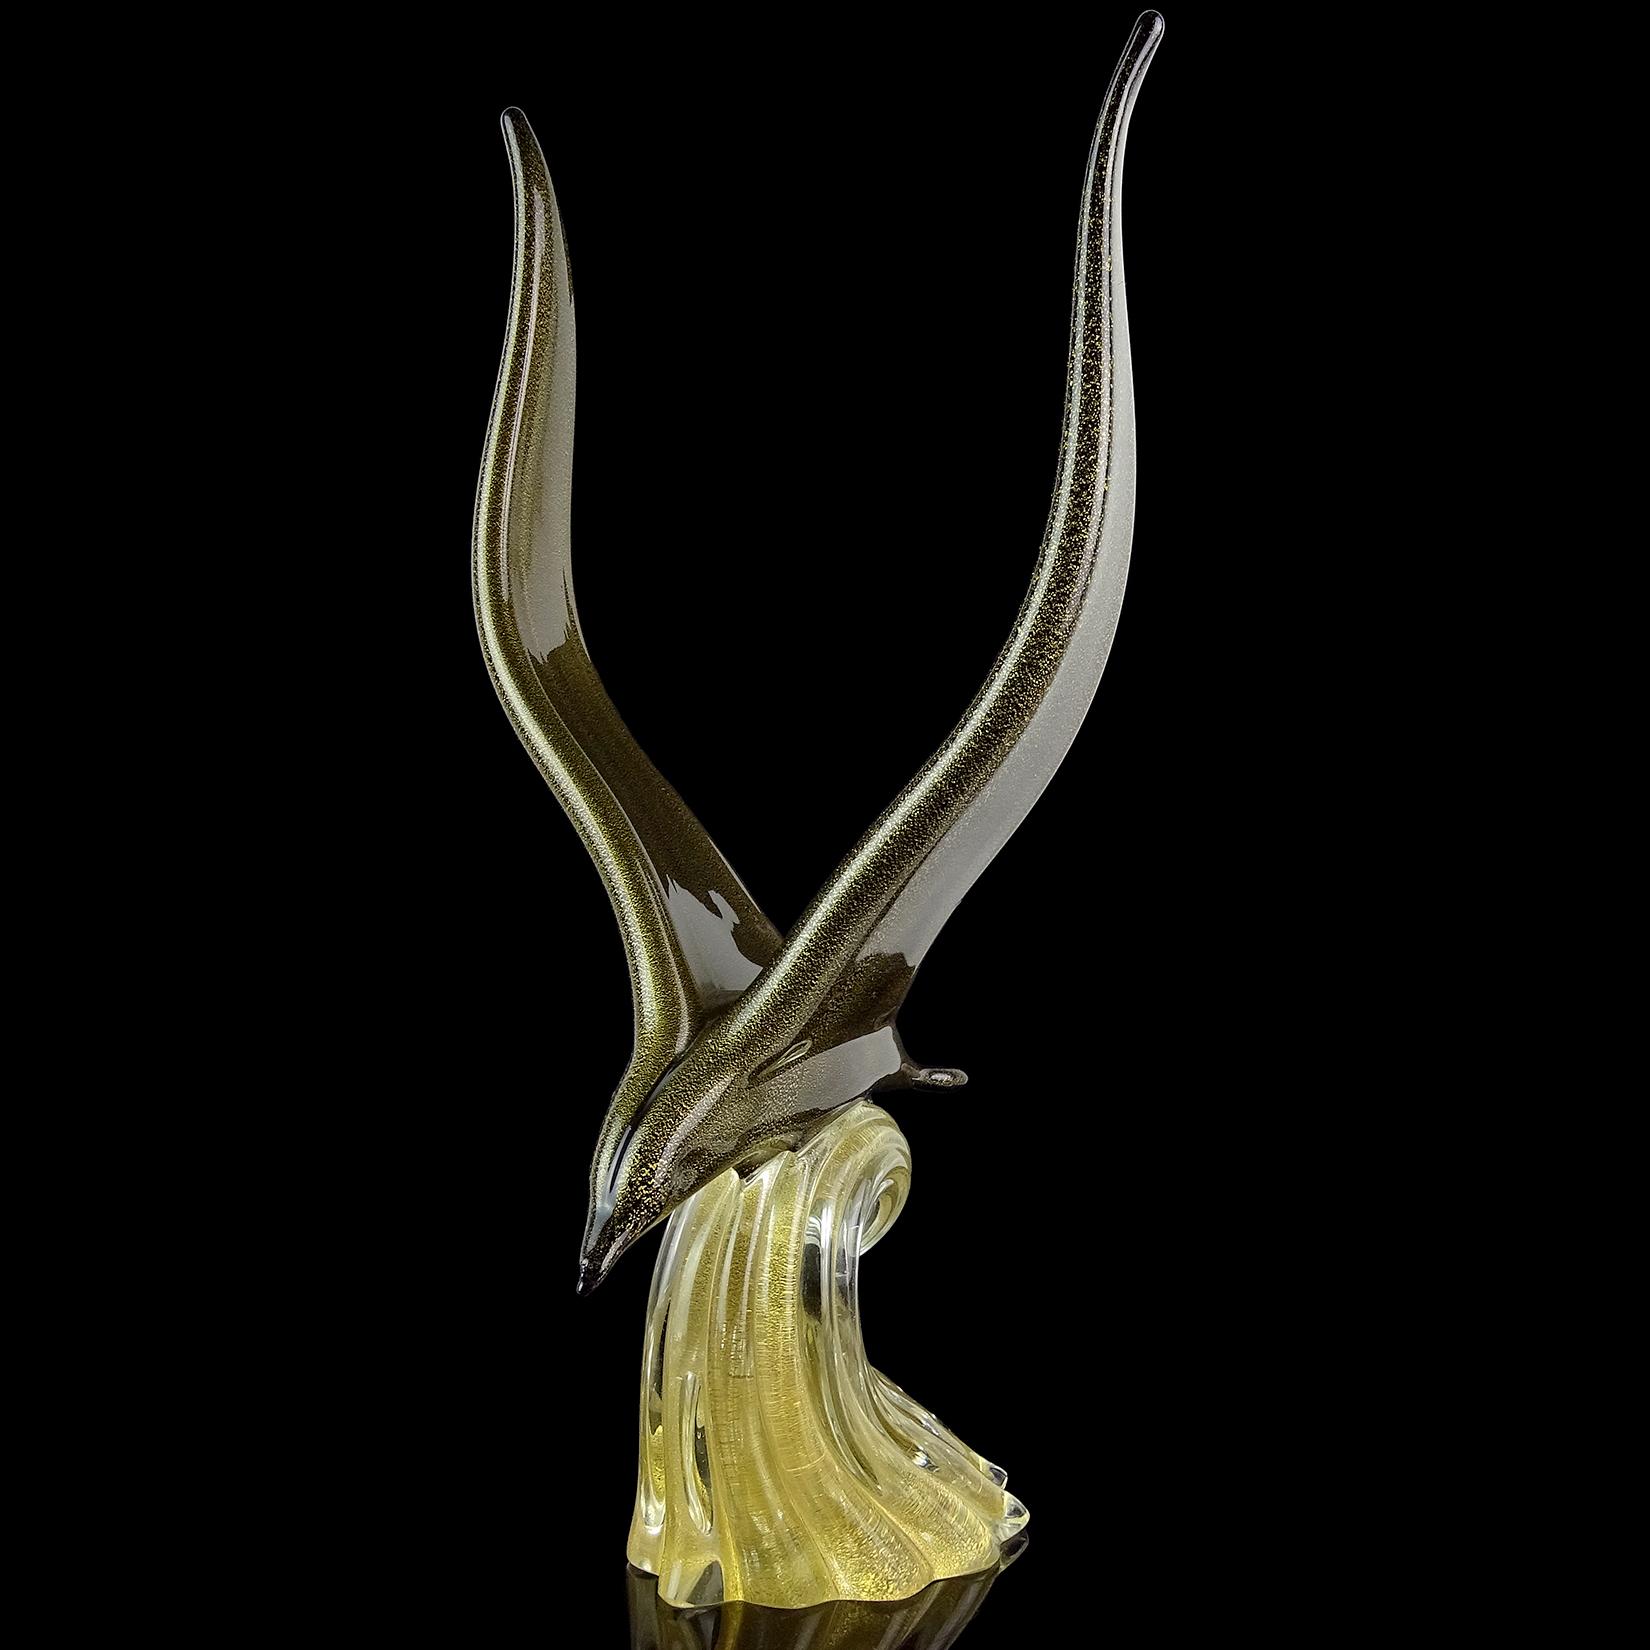 Hand-Crafted Archimede Seguso Murano Signed Black Gold Italian Art Glass Seagull Sculpture